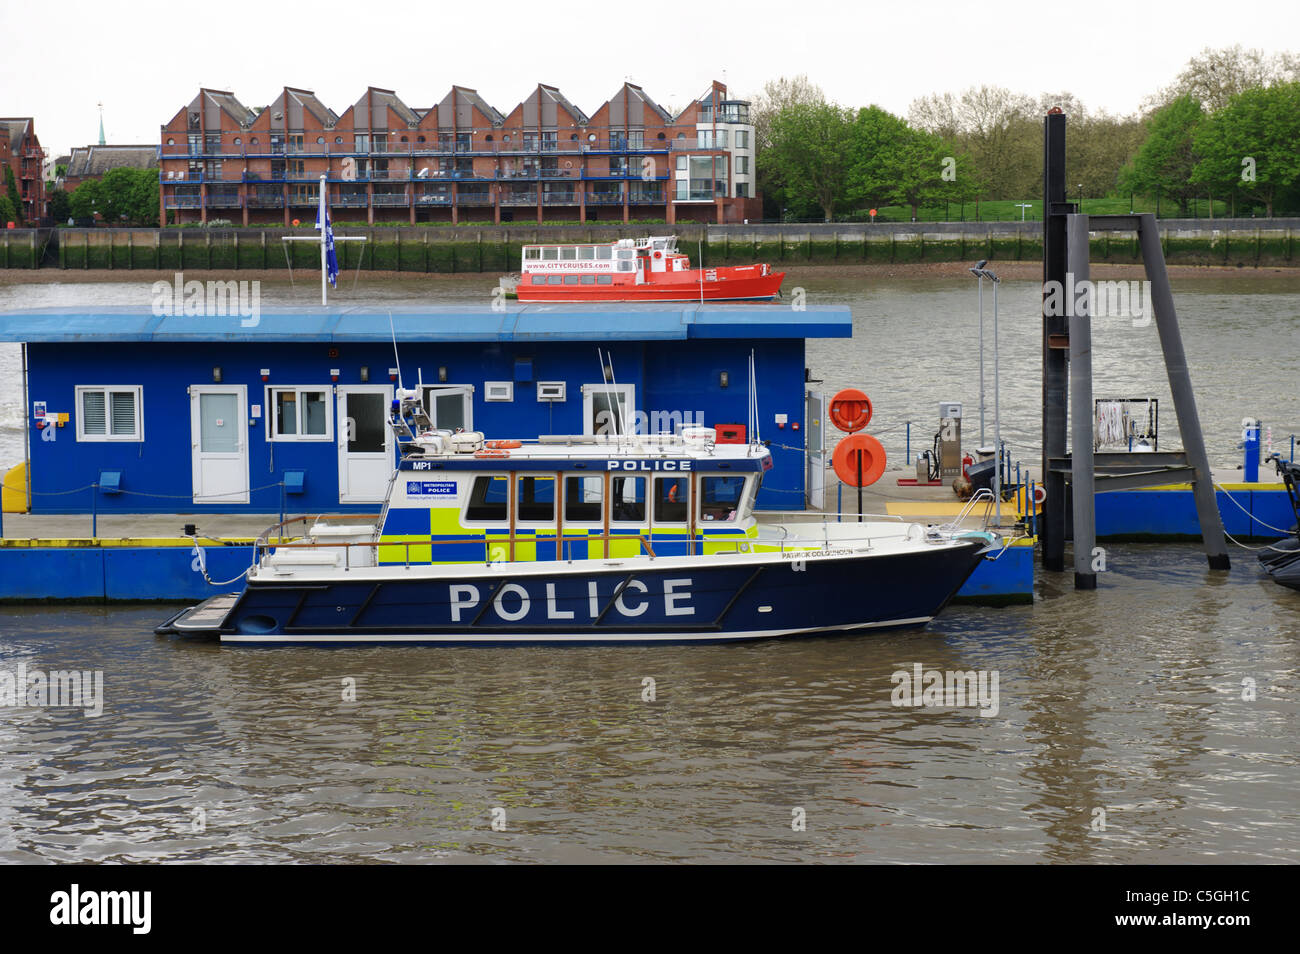 The Marine Policing Unit at the River Thames, Wapping, London, England, UK Stock Photo